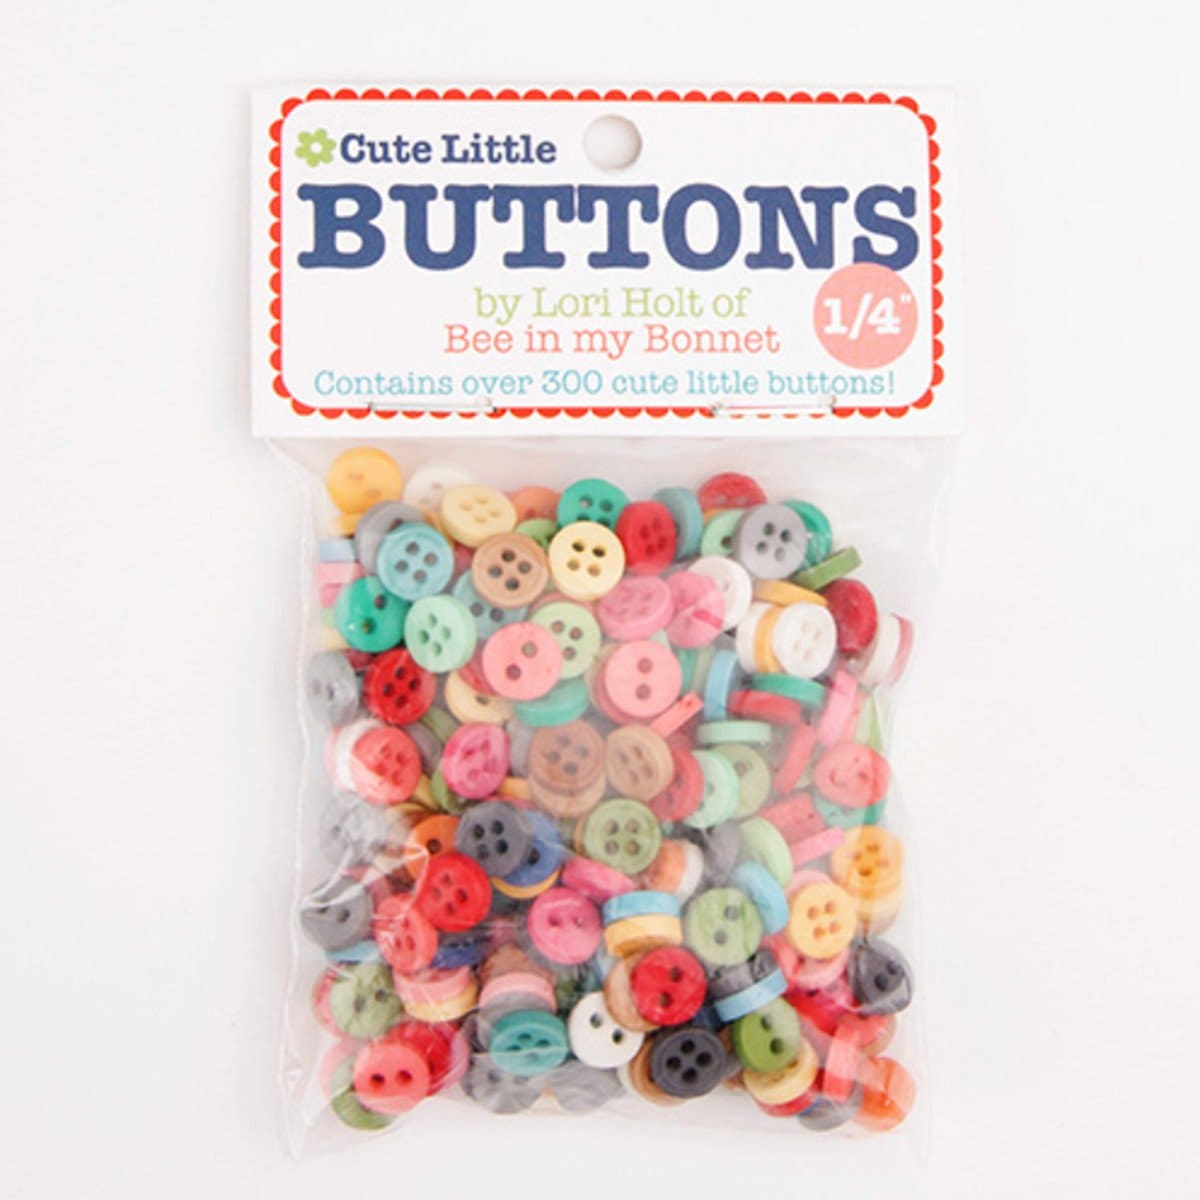 Buy Buttons For Stitch Craft Projects Online. Low Prices. Free S